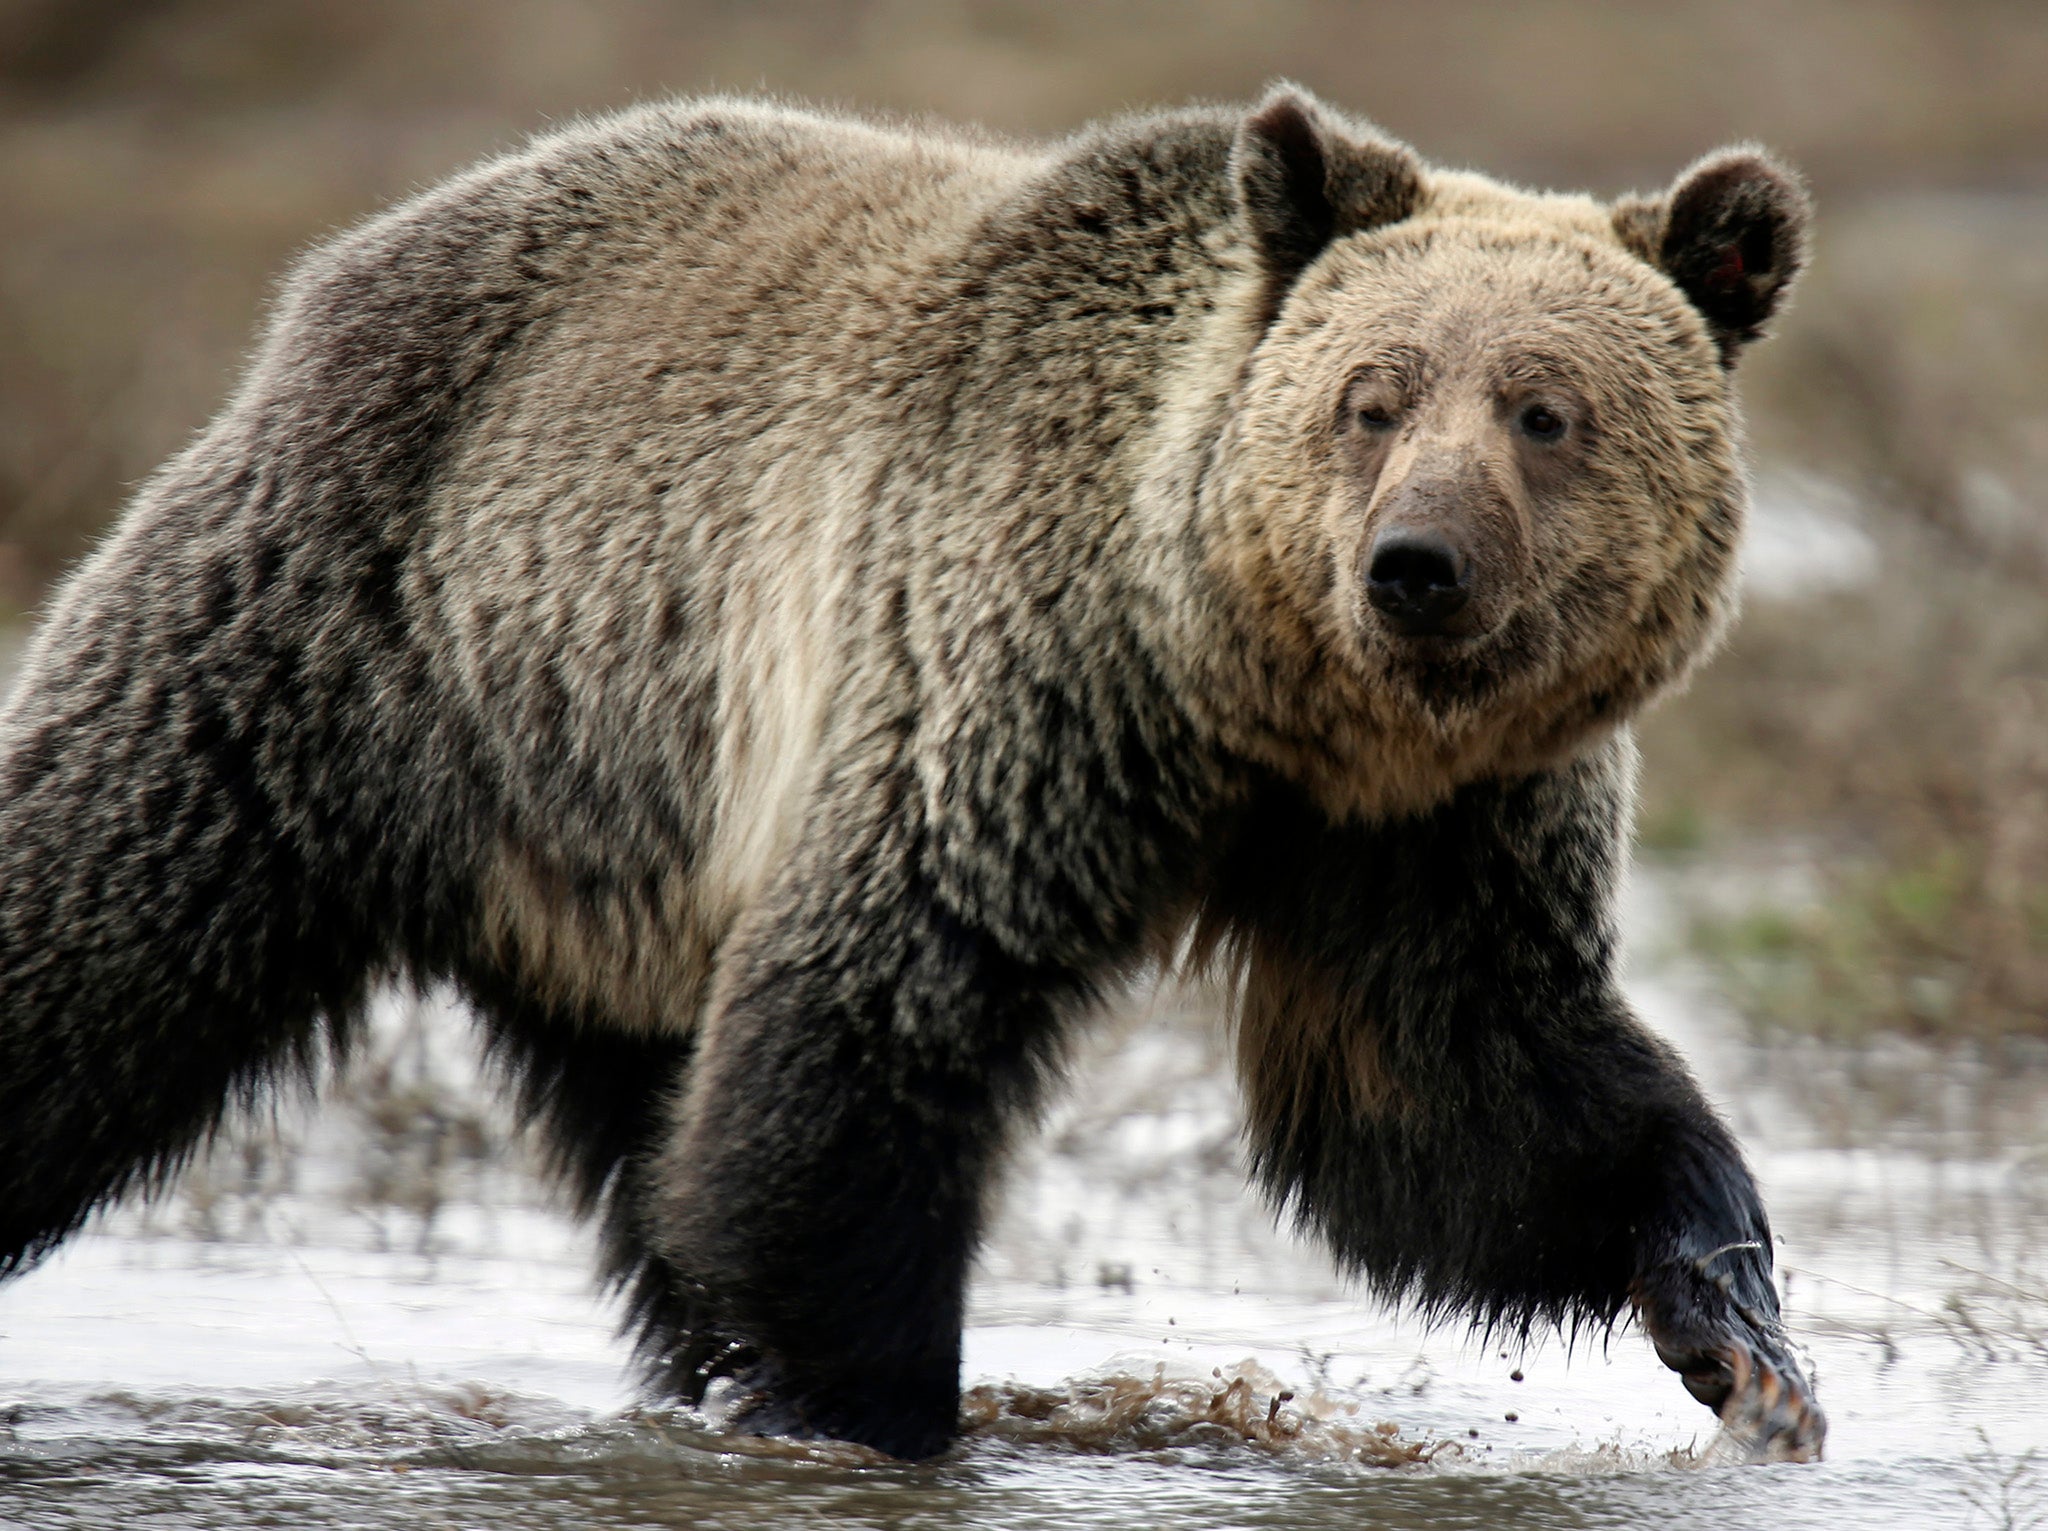 Grizzly Bears have been an endangered species but numbers have been increasing thanks to conservation efforts